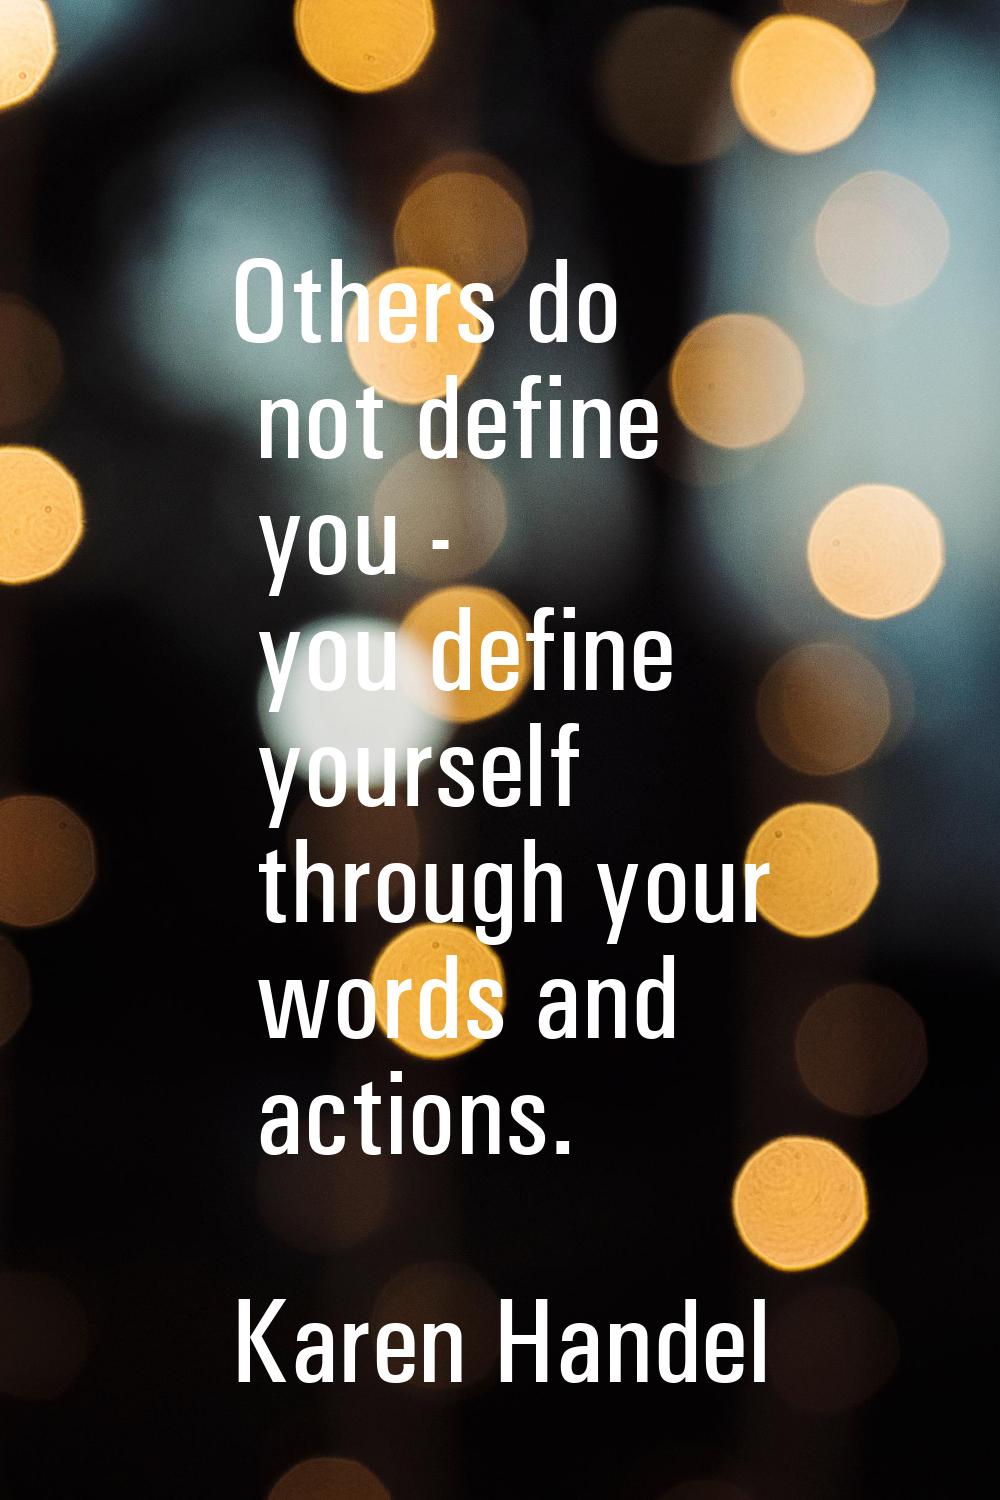 Others do not define you - you define yourself through your words and actions.